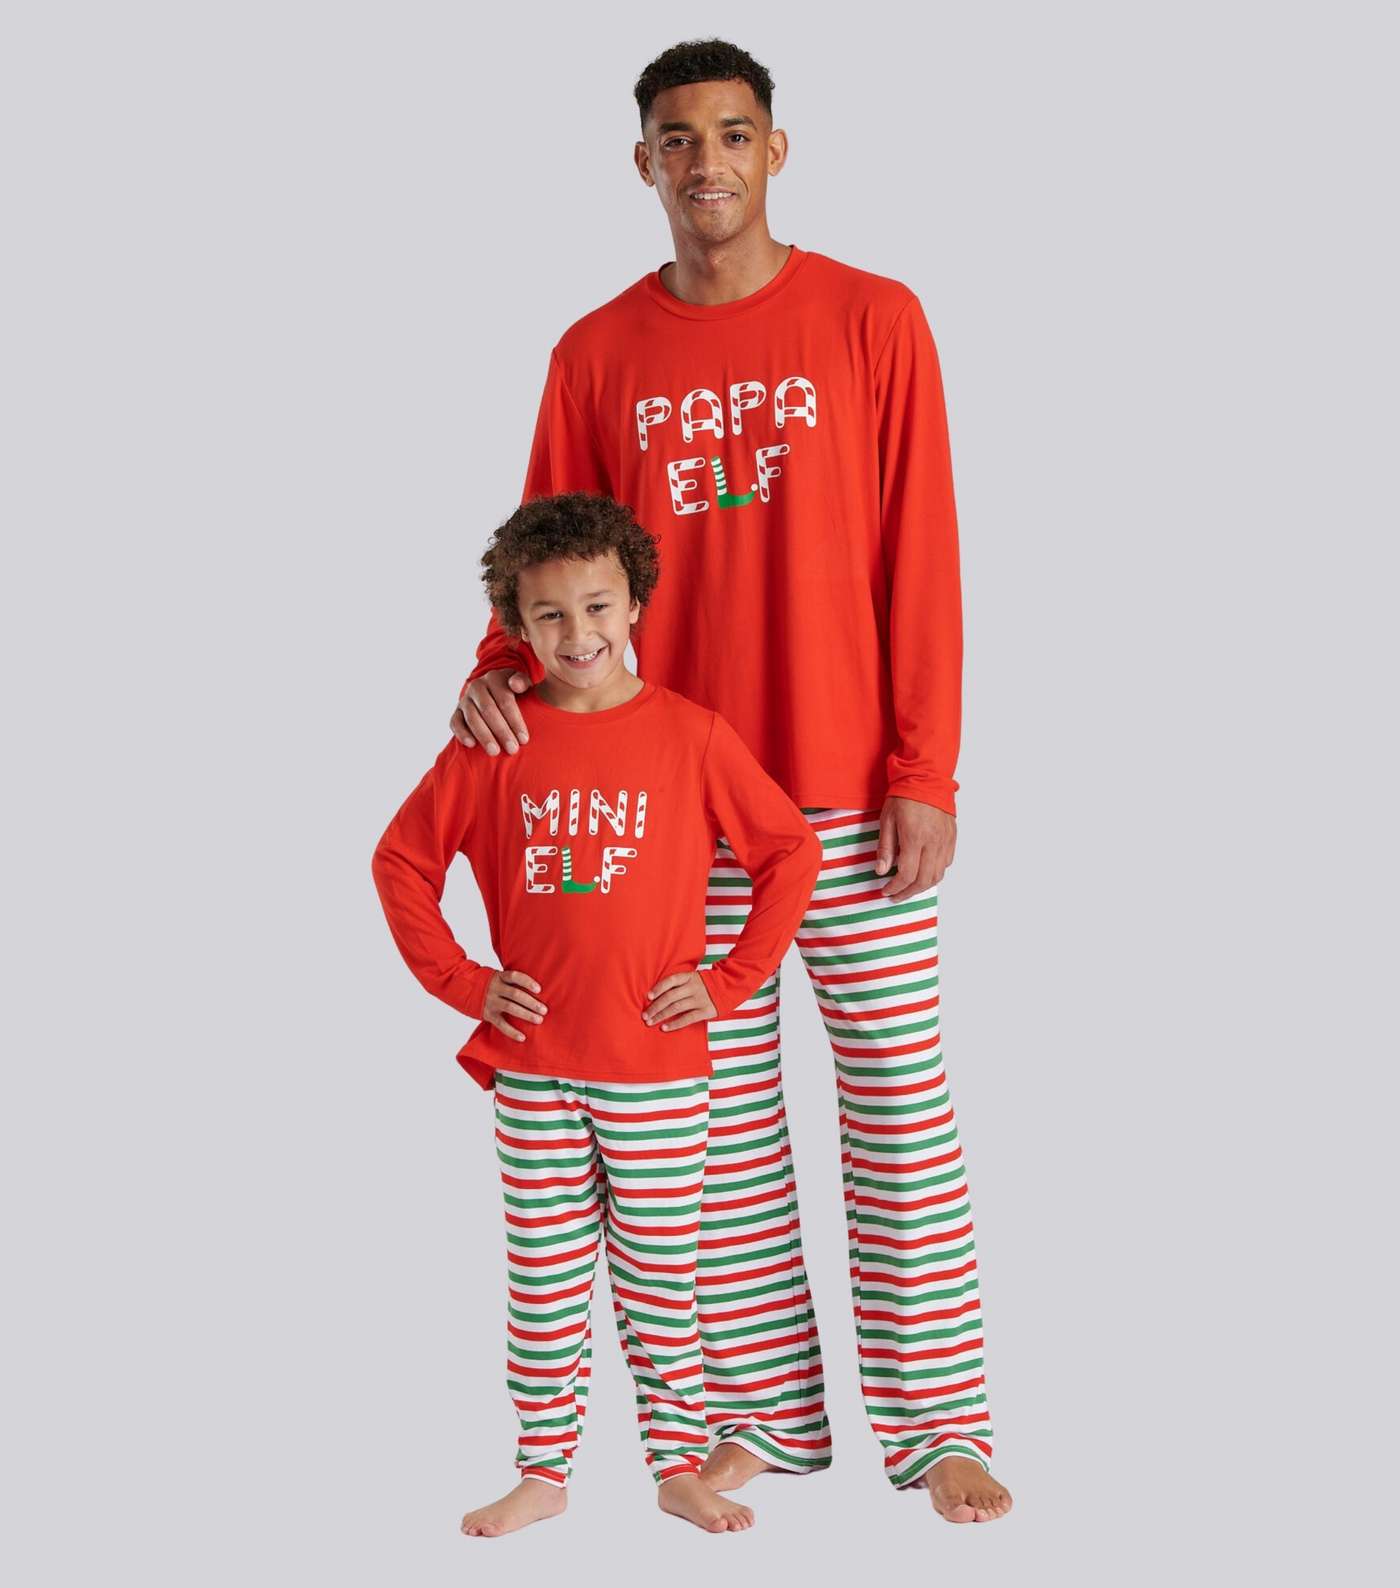 Loungeable Red Trouser Pyjama Set with Papa Elf Logo Image 4